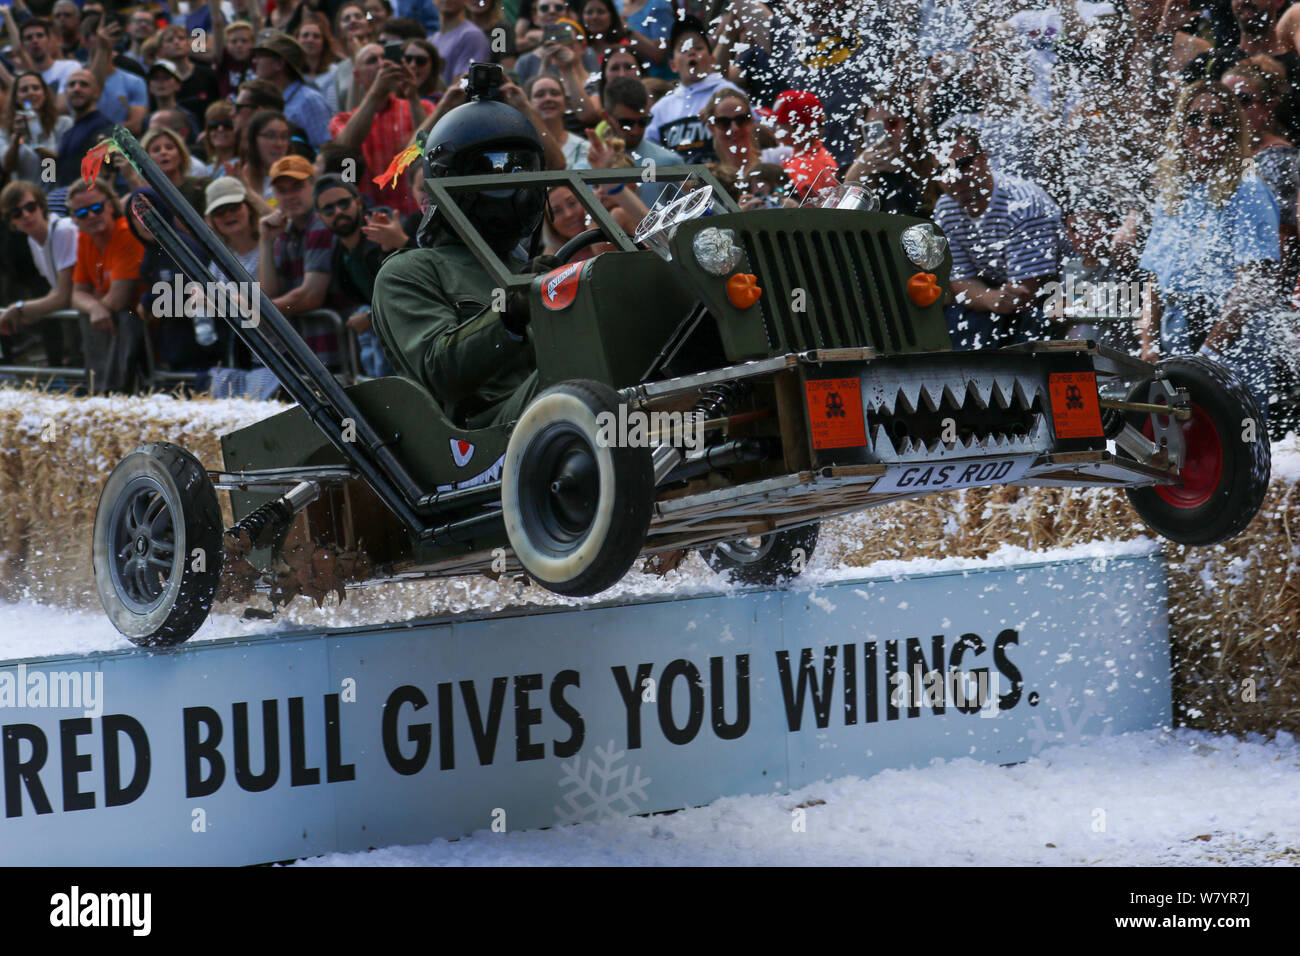 Team Gas Gas winners of the 2019 Red Bull Soapbox Race, pass over the final jump on the course at Alexandra Palace Stock Photo - Alamy